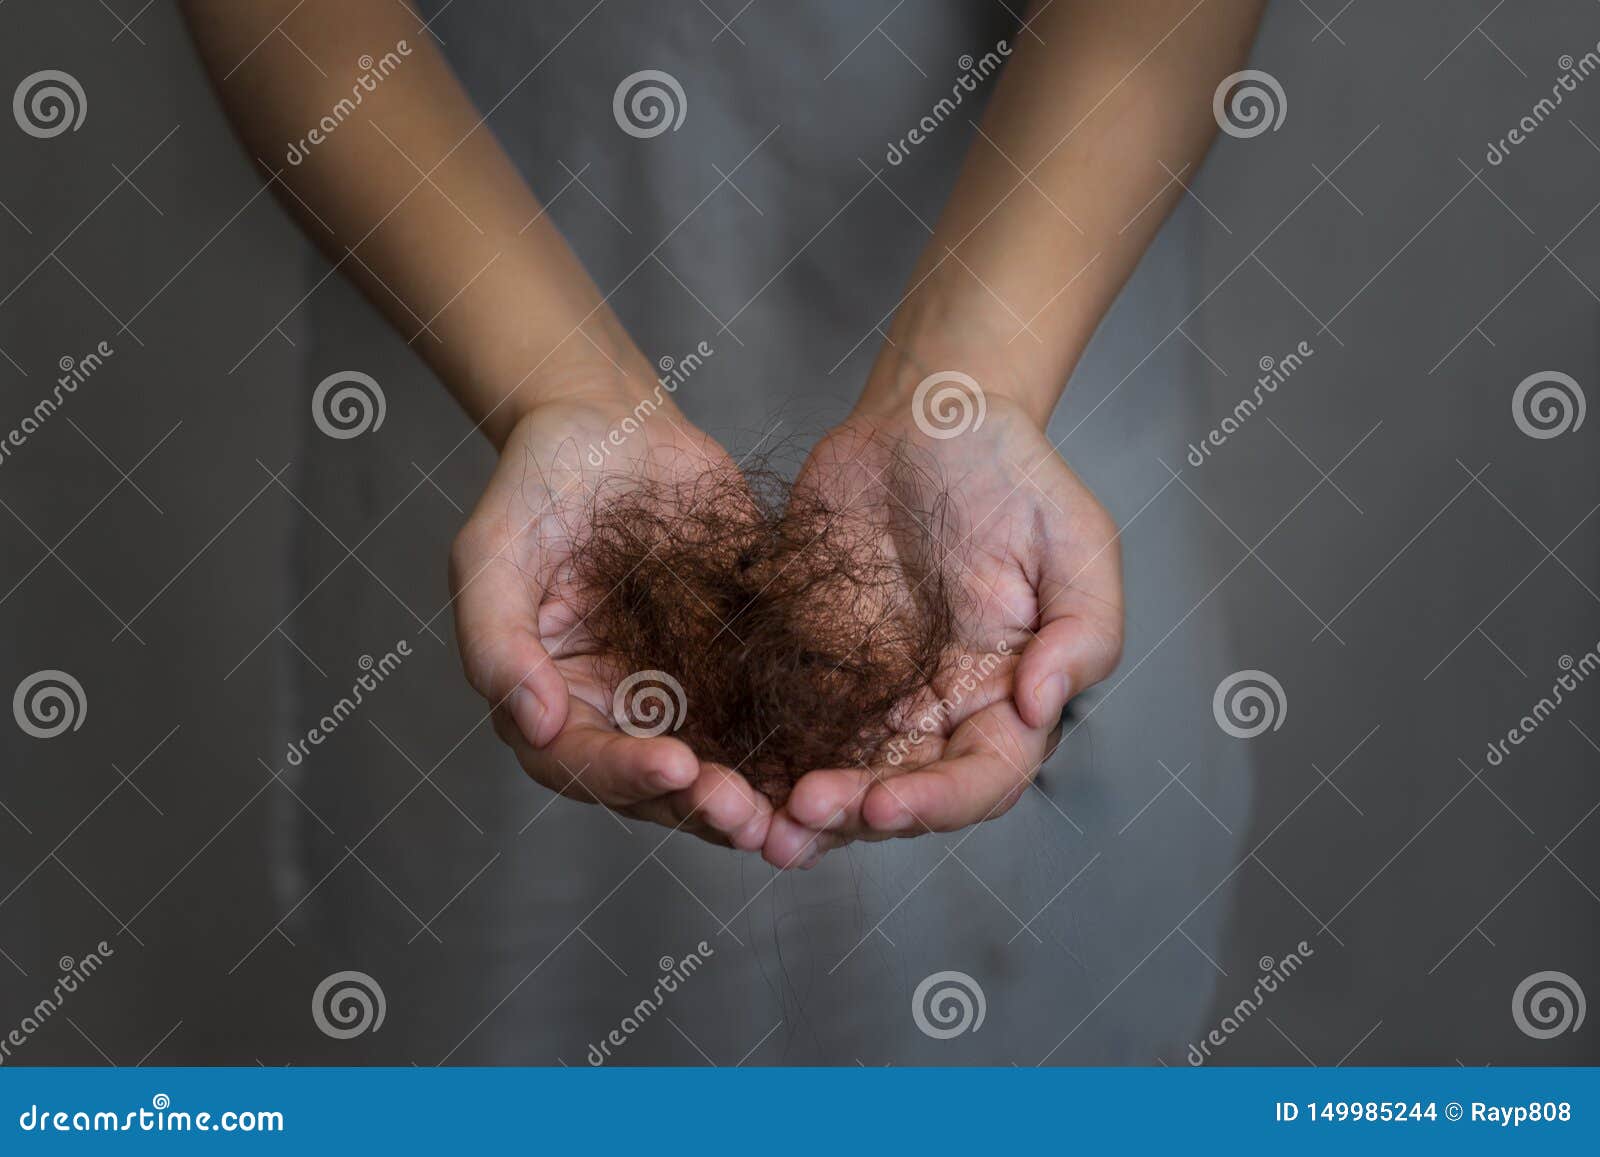 a woman suffering from hair loss. balding